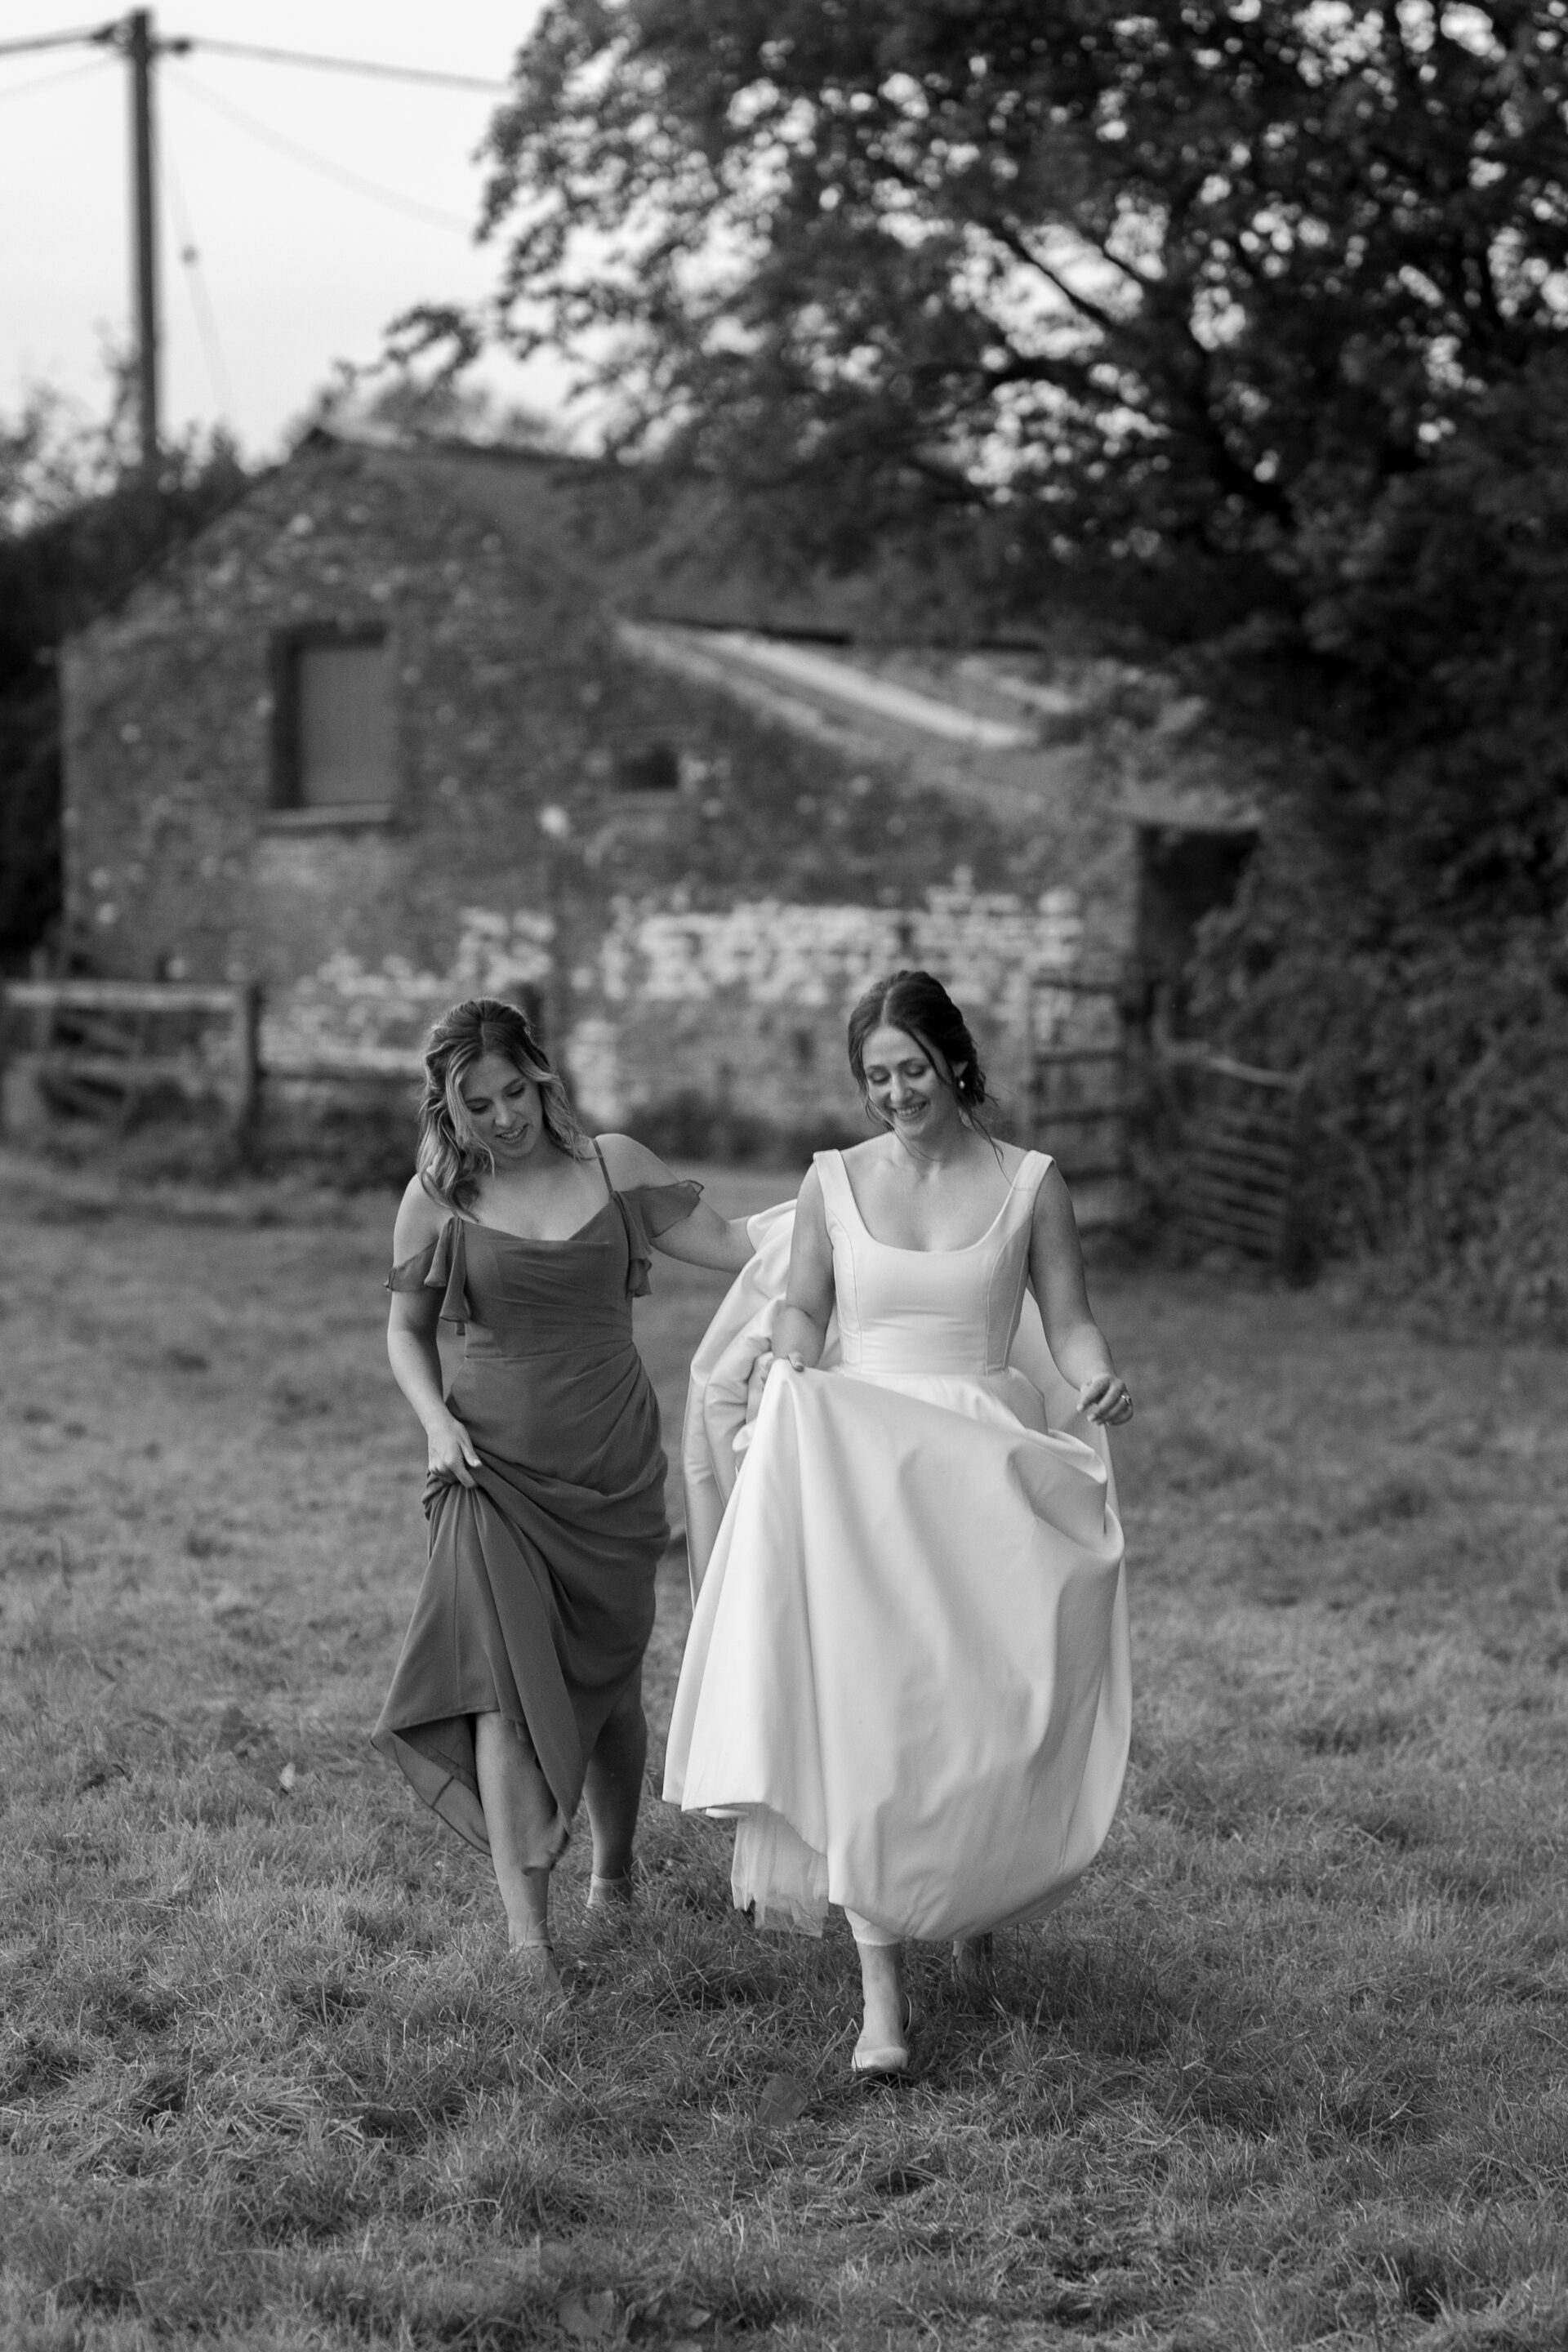 The bride walks with her bridesmaid